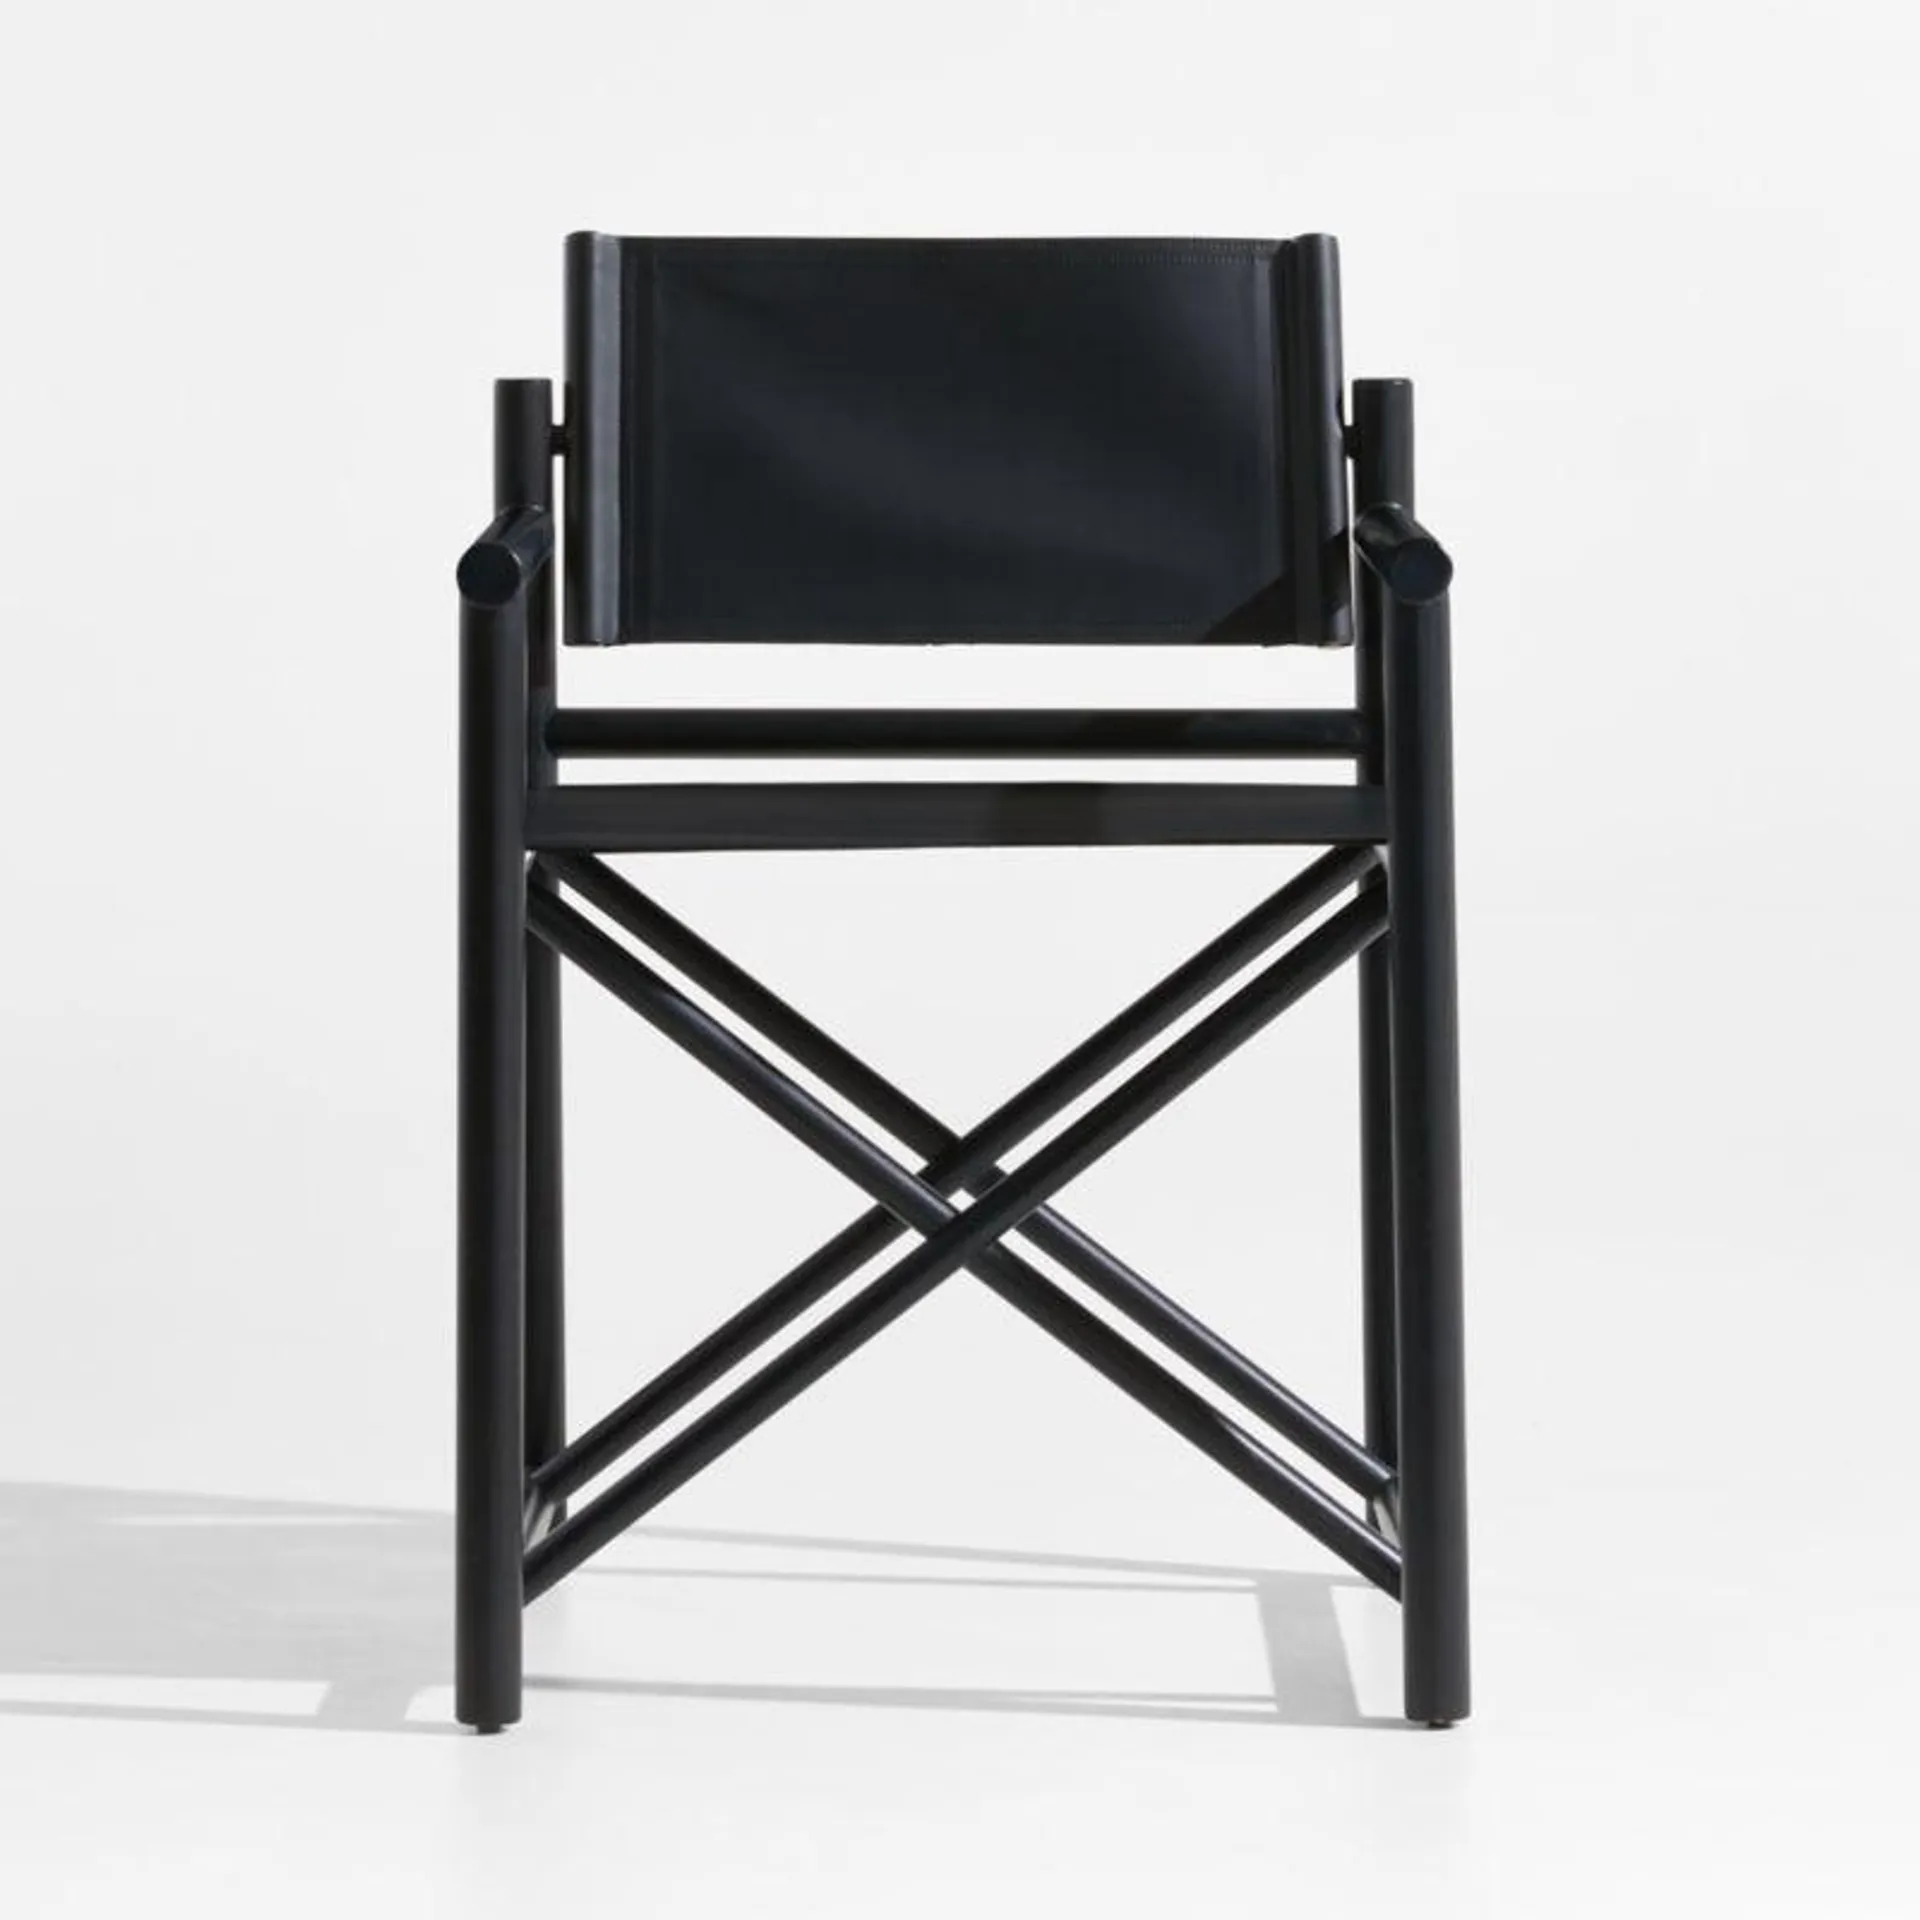 Mast Charcoal Leather Director's Chair by Leanne Ford + Reviews | Crate & Barrel